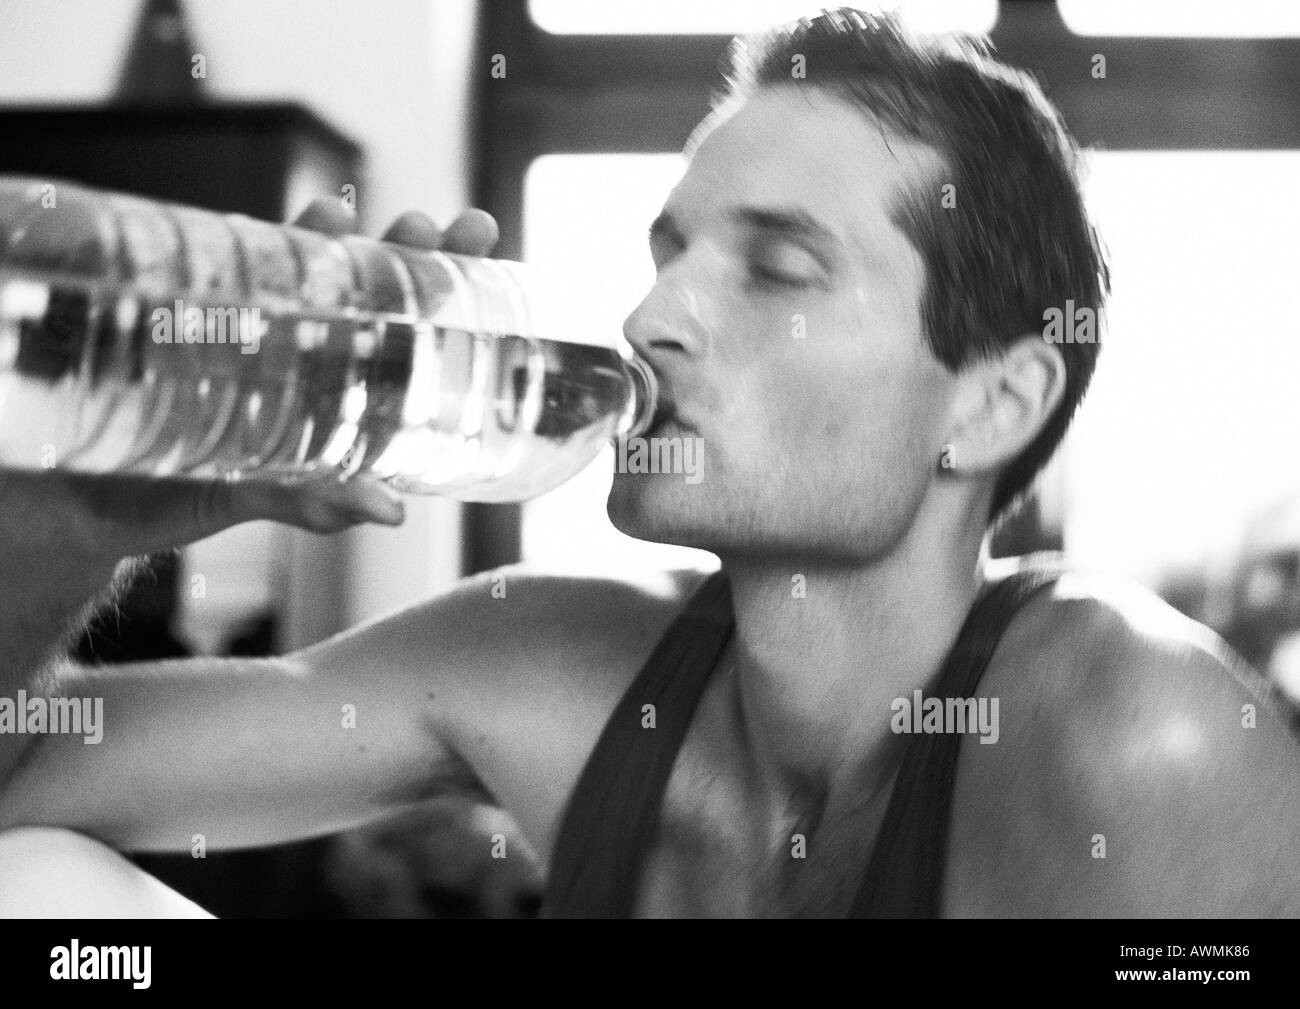 Man drinking from bottle, close-up, b&w Stock Photo